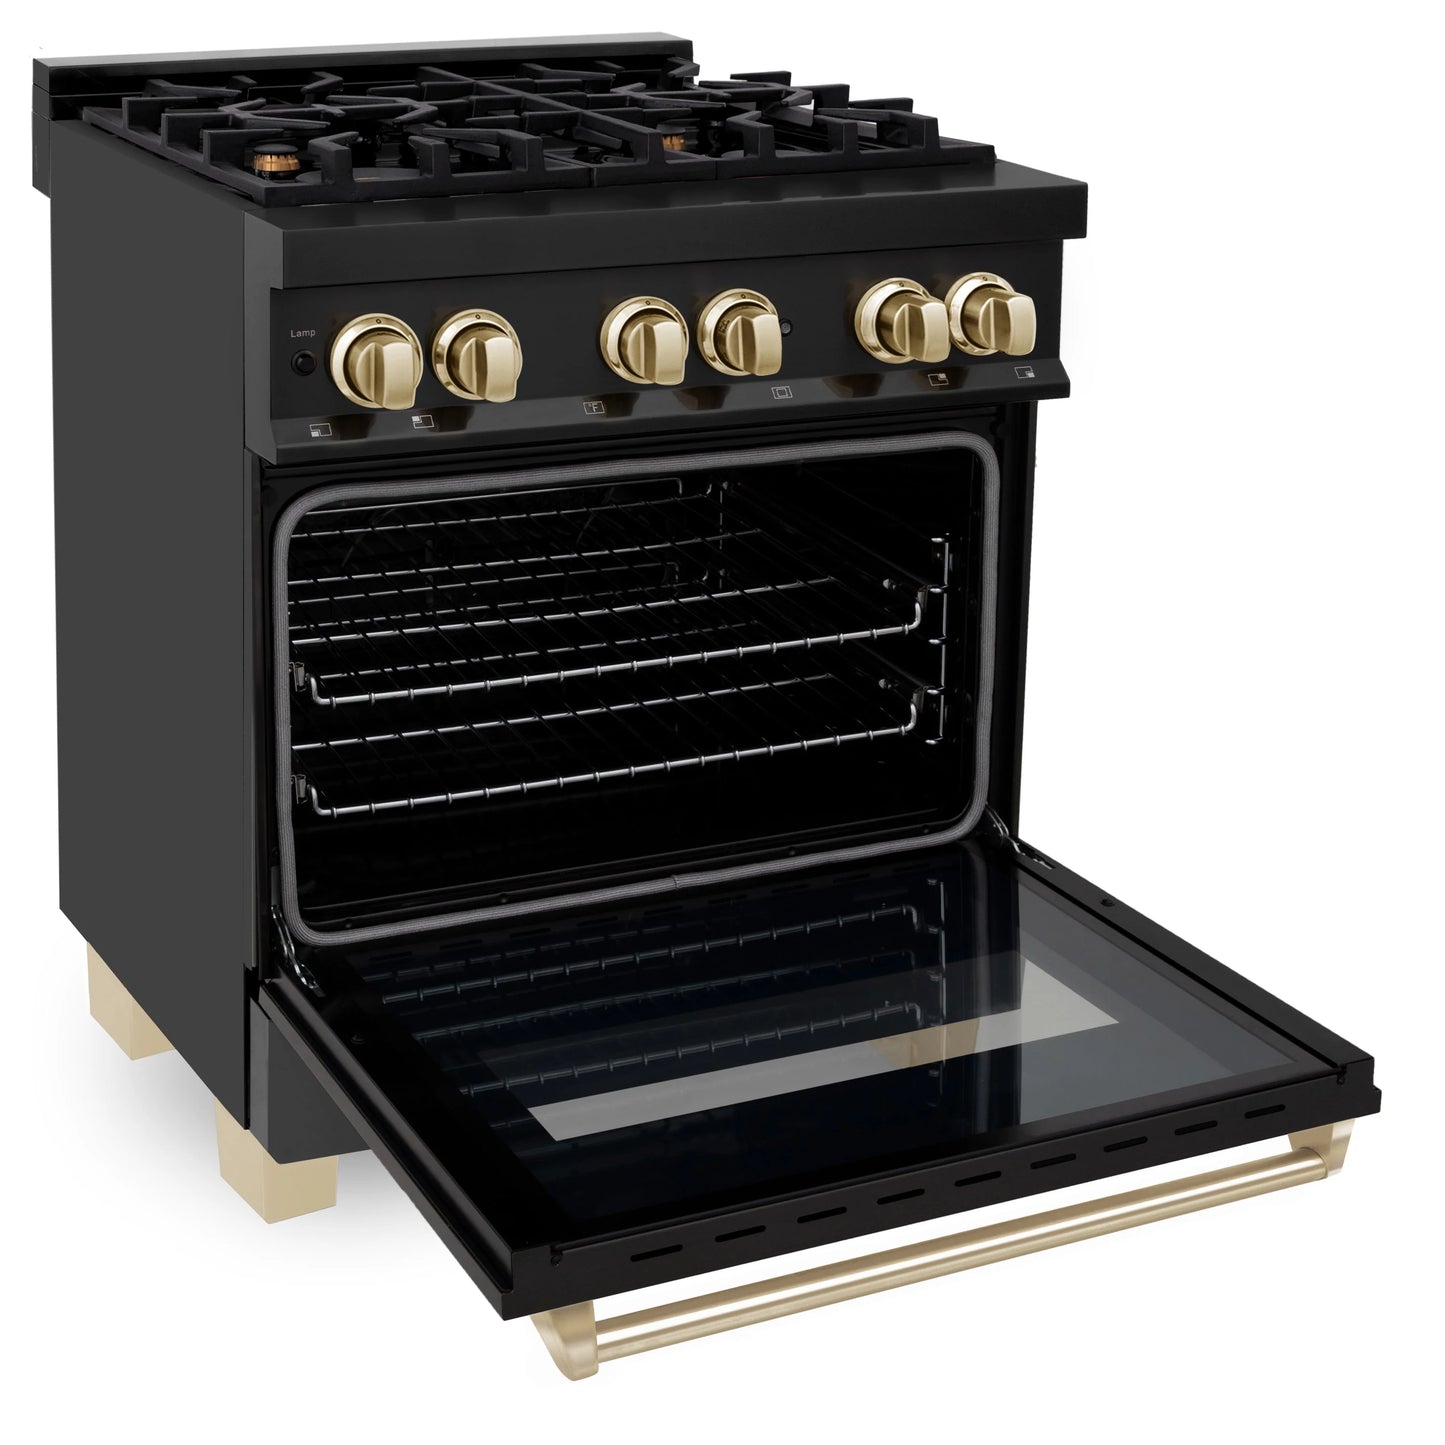 ZLINE Autograph Edition 30 in. Dual Fuel Range with Gas Stove and Electric Oven in Black Stainless Steel with Gold Accents (RABZ-30-G)